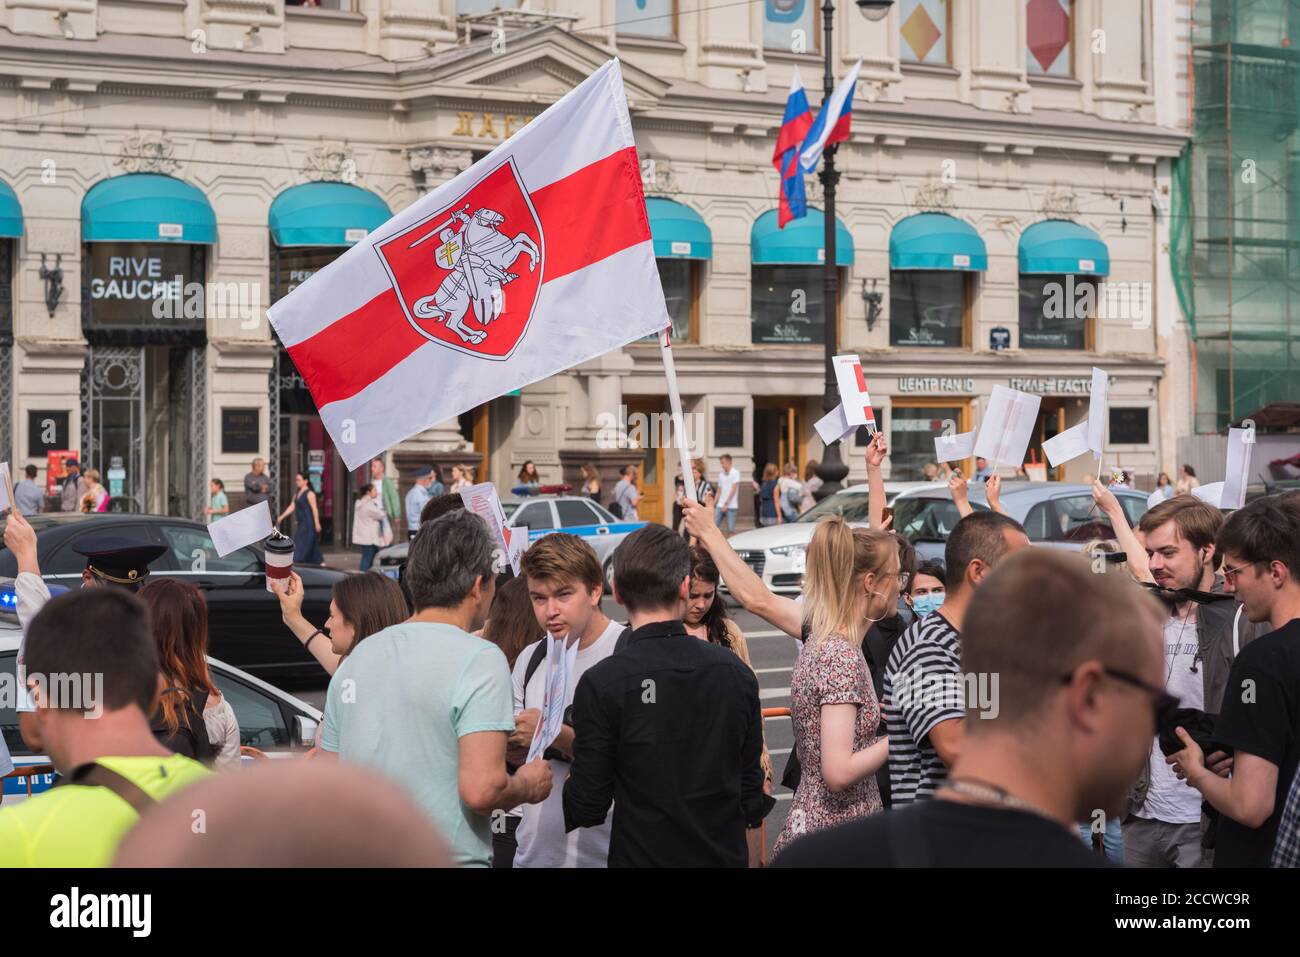 Saint Petersburg, Russia - August 22, 2020: people support democracy in Belarus waving with a white-red-white flag over Nevsky Prospect. Stock Photo